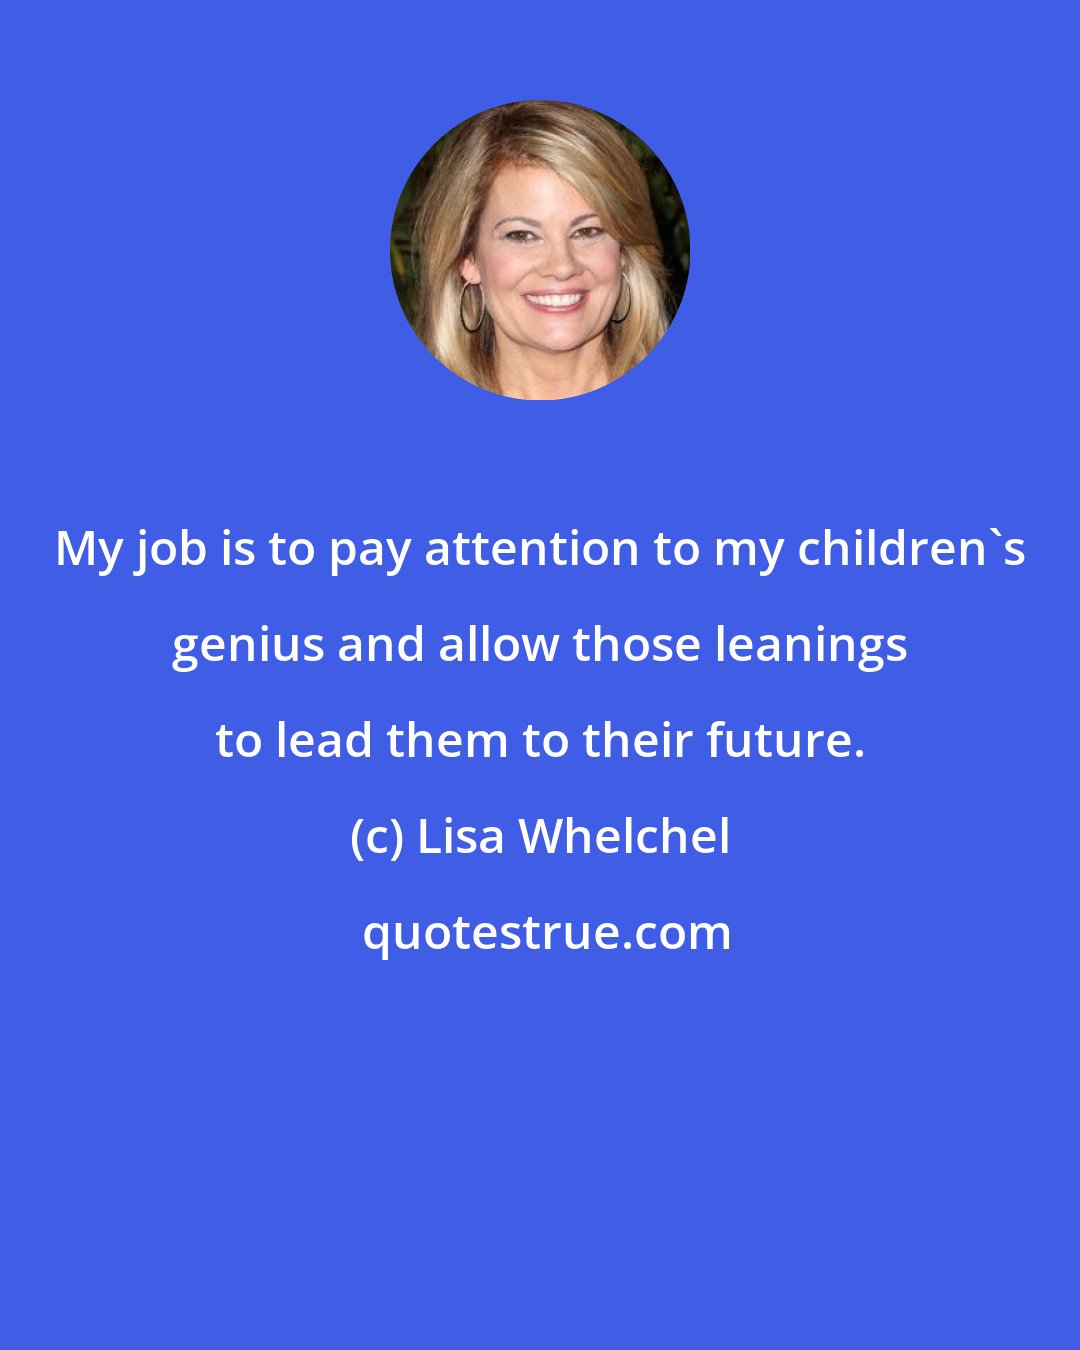 Lisa Whelchel: My job is to pay attention to my children's genius and allow those leanings to lead them to their future.